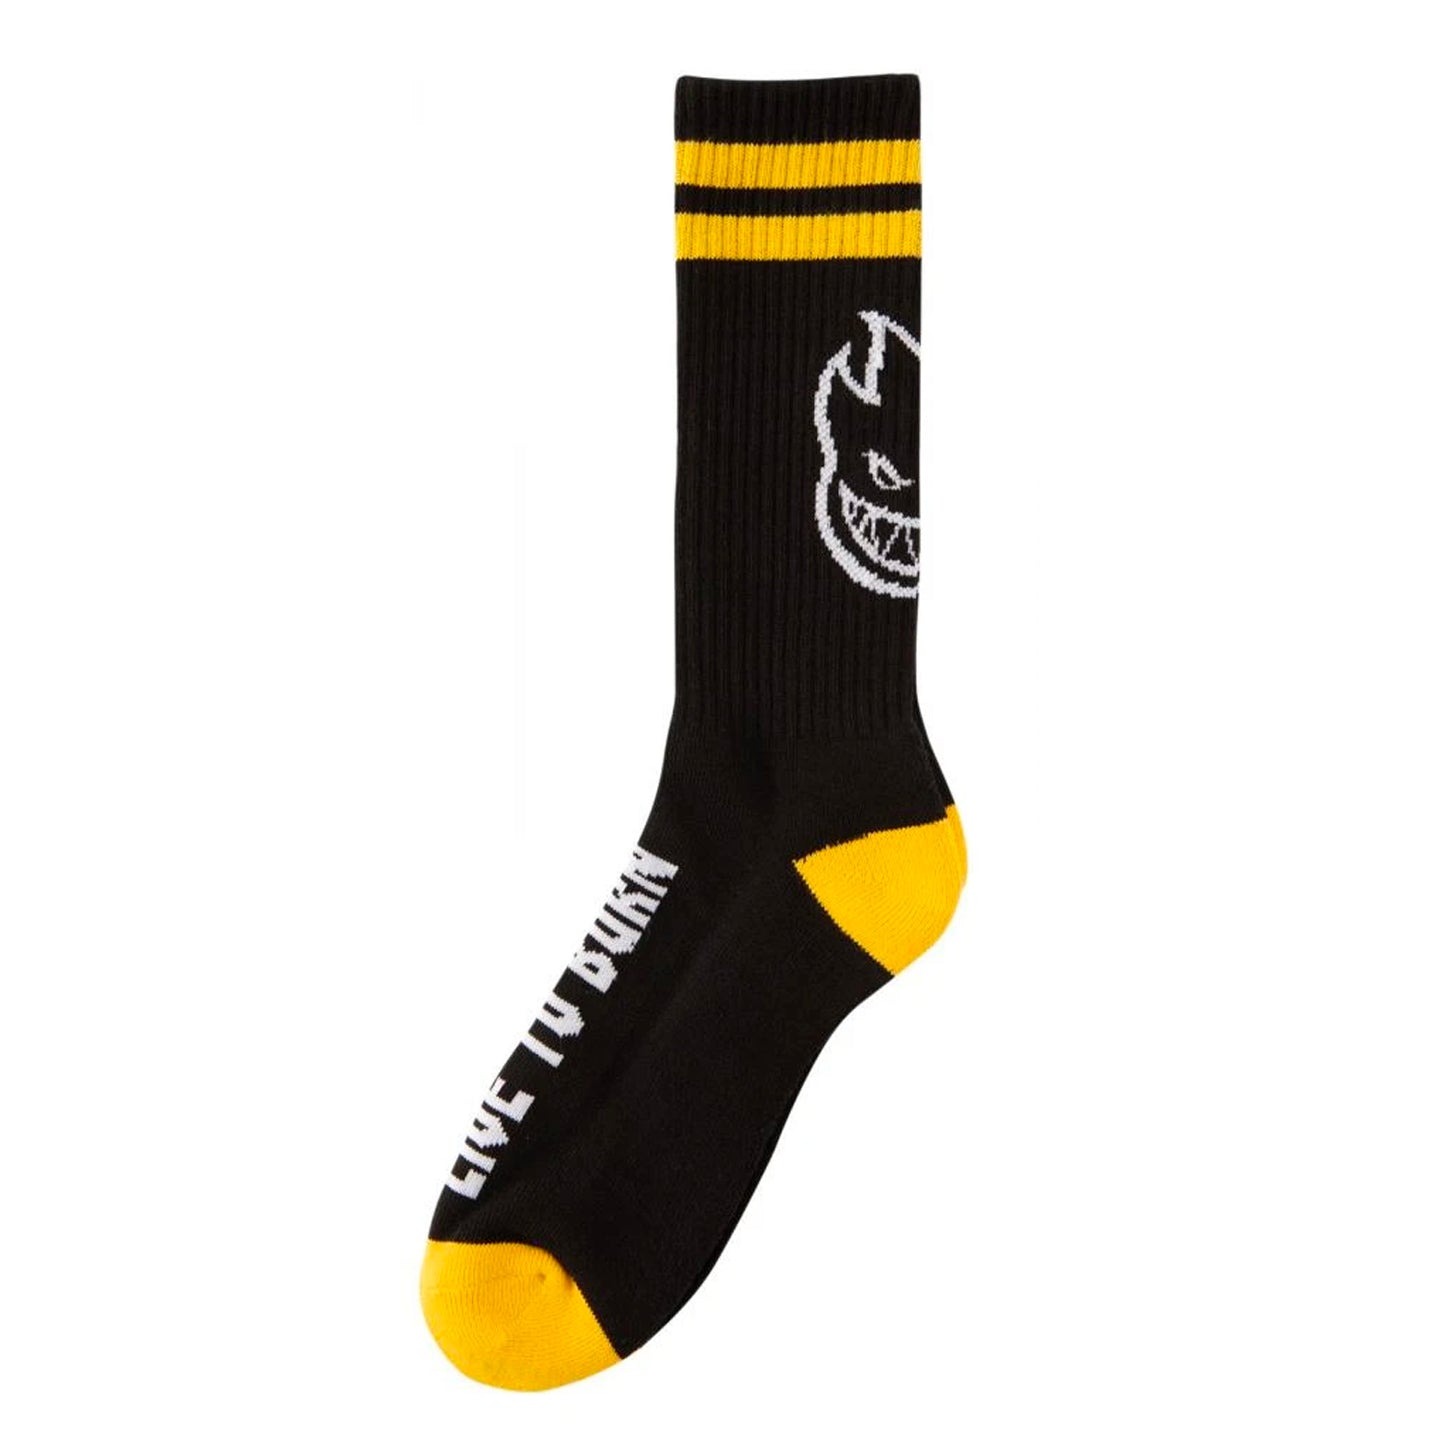 Spitfire Socks Heads Up - Black / Yellow / White - Prime Delux Store